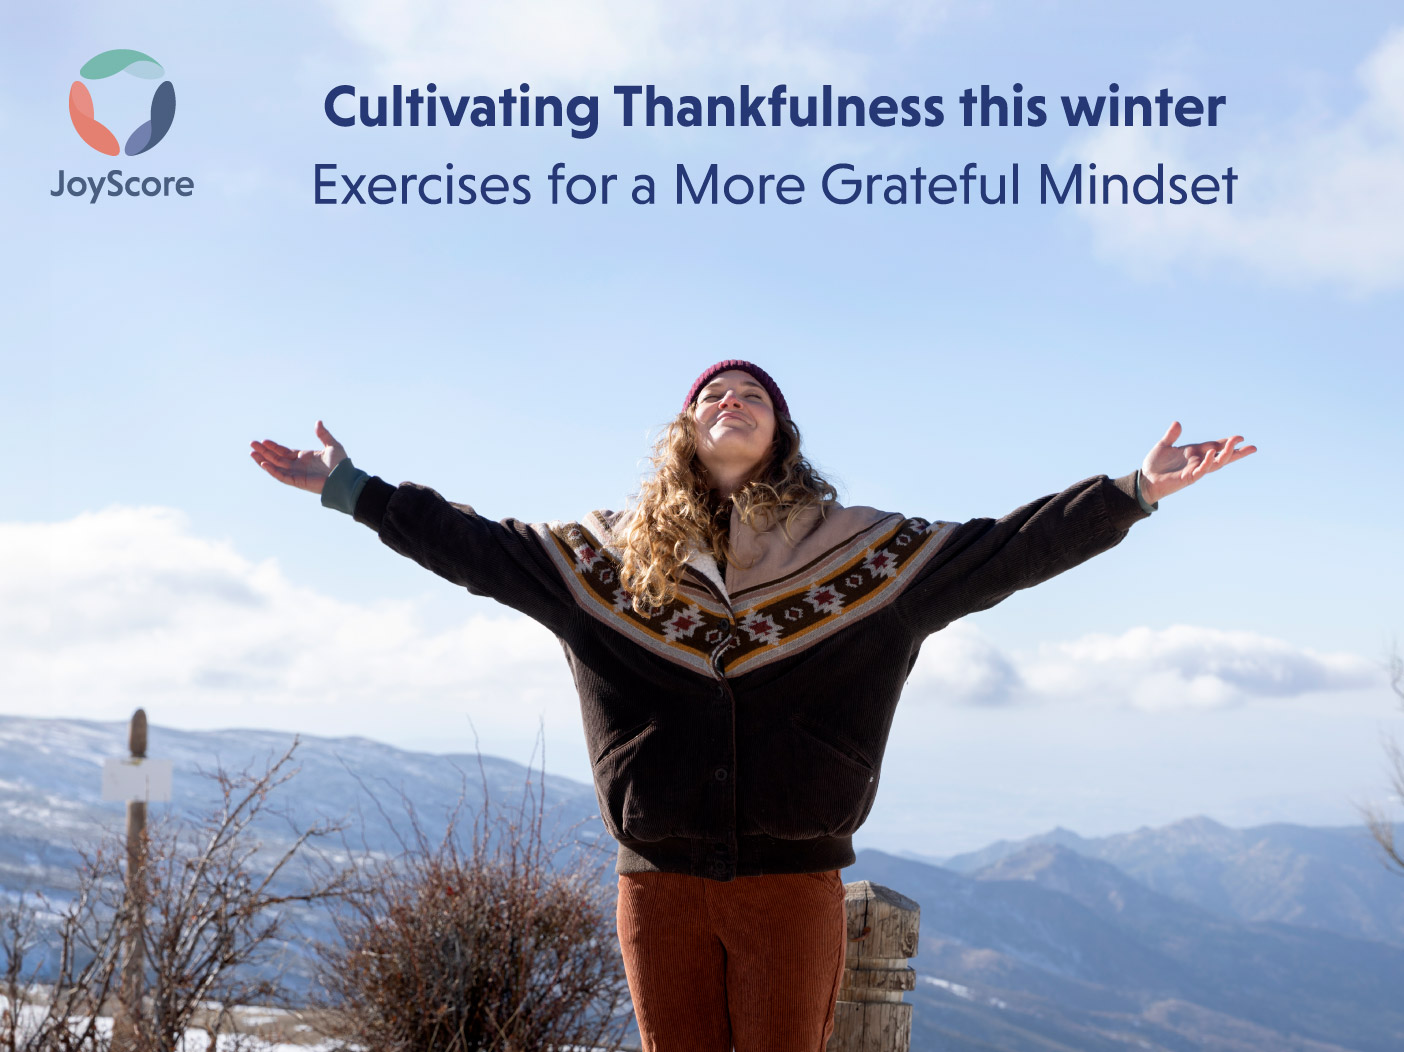 Cultivating Thankfulness this winter – Exercises for a More Grateful Mindset